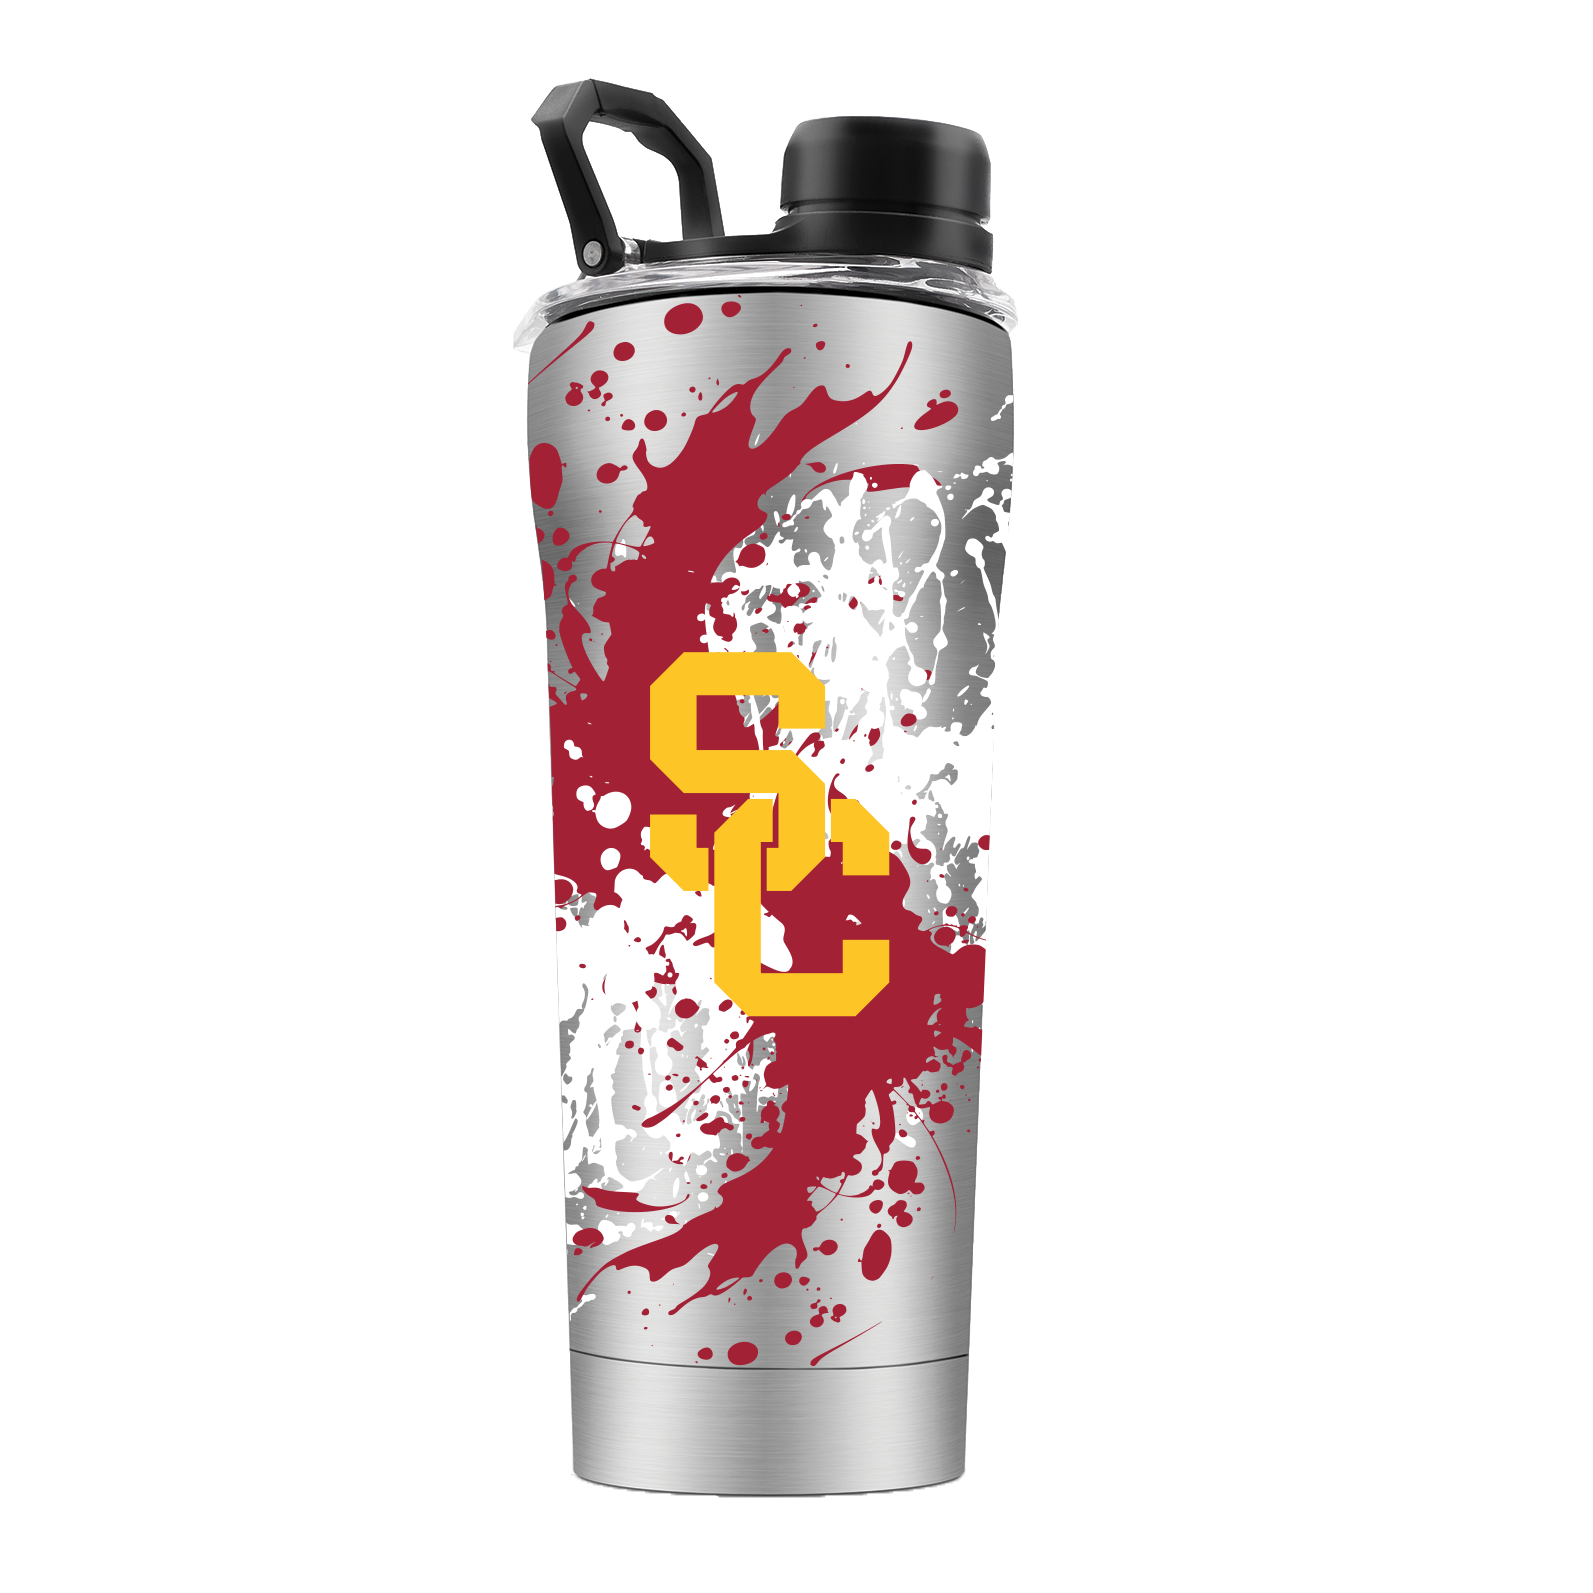 Southern California Stainless Steel Shaker